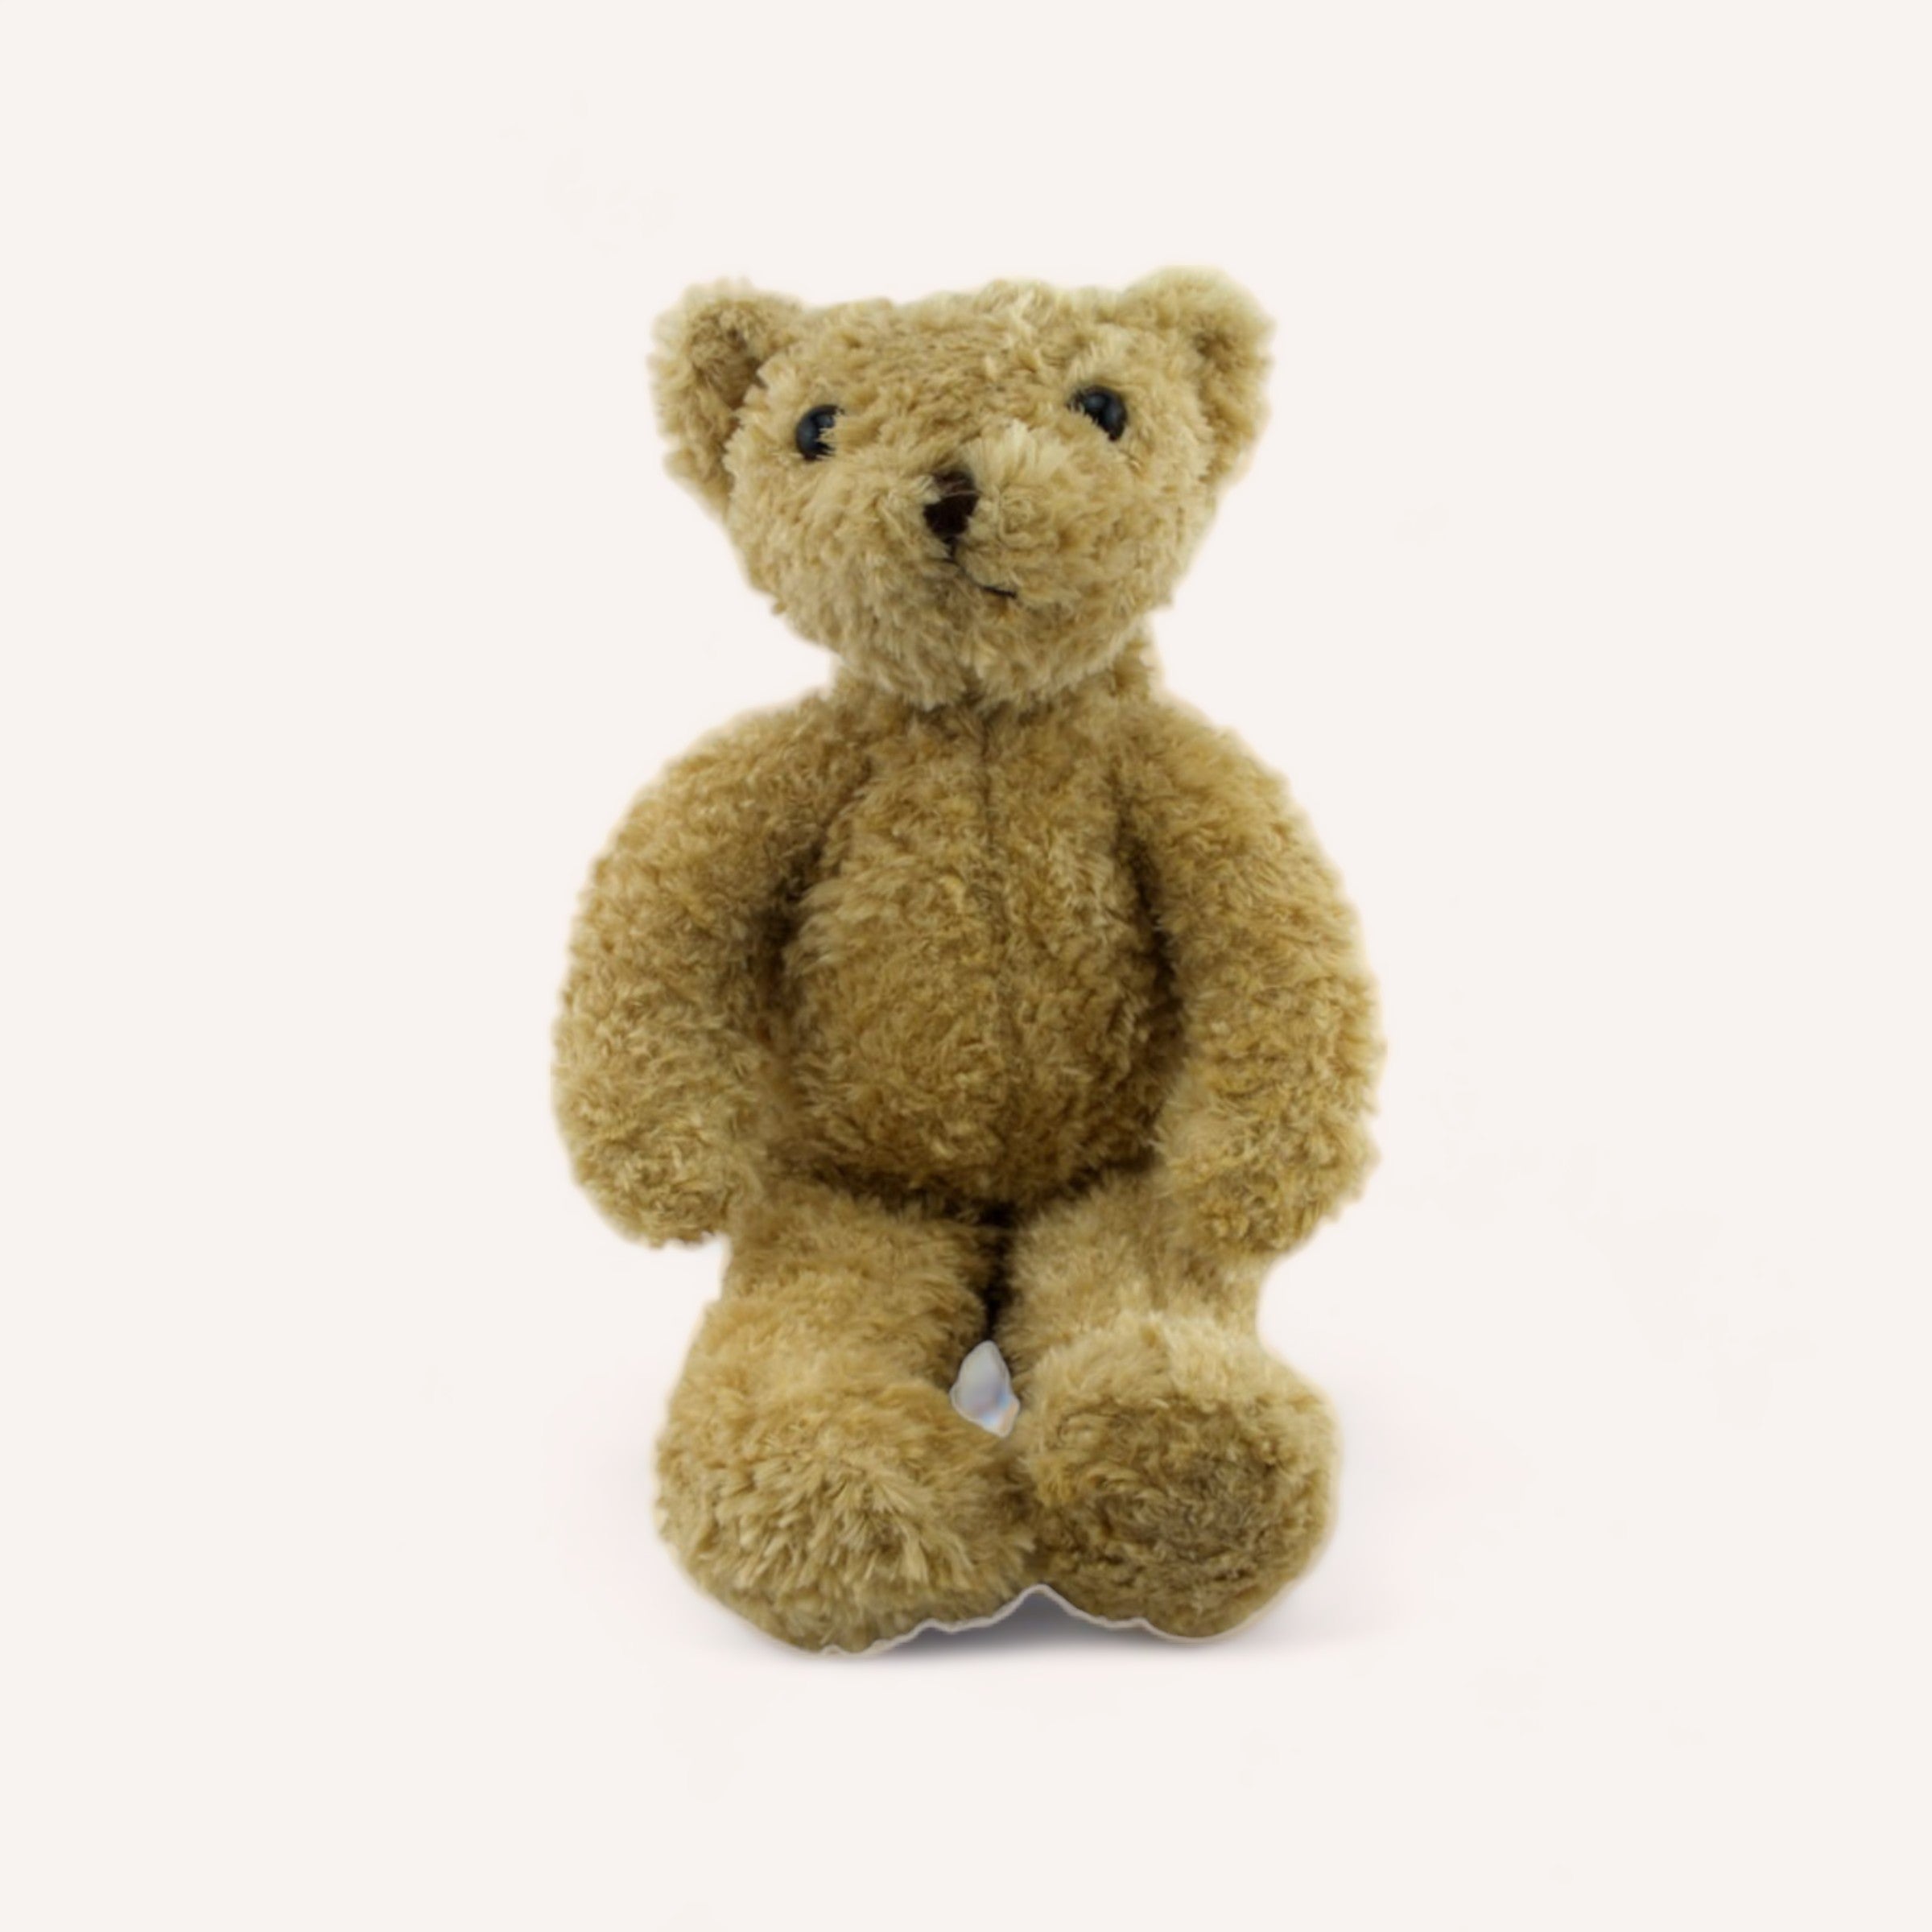 A cuddly Joshua Bear from The Teddy Factory sitting against a white background.